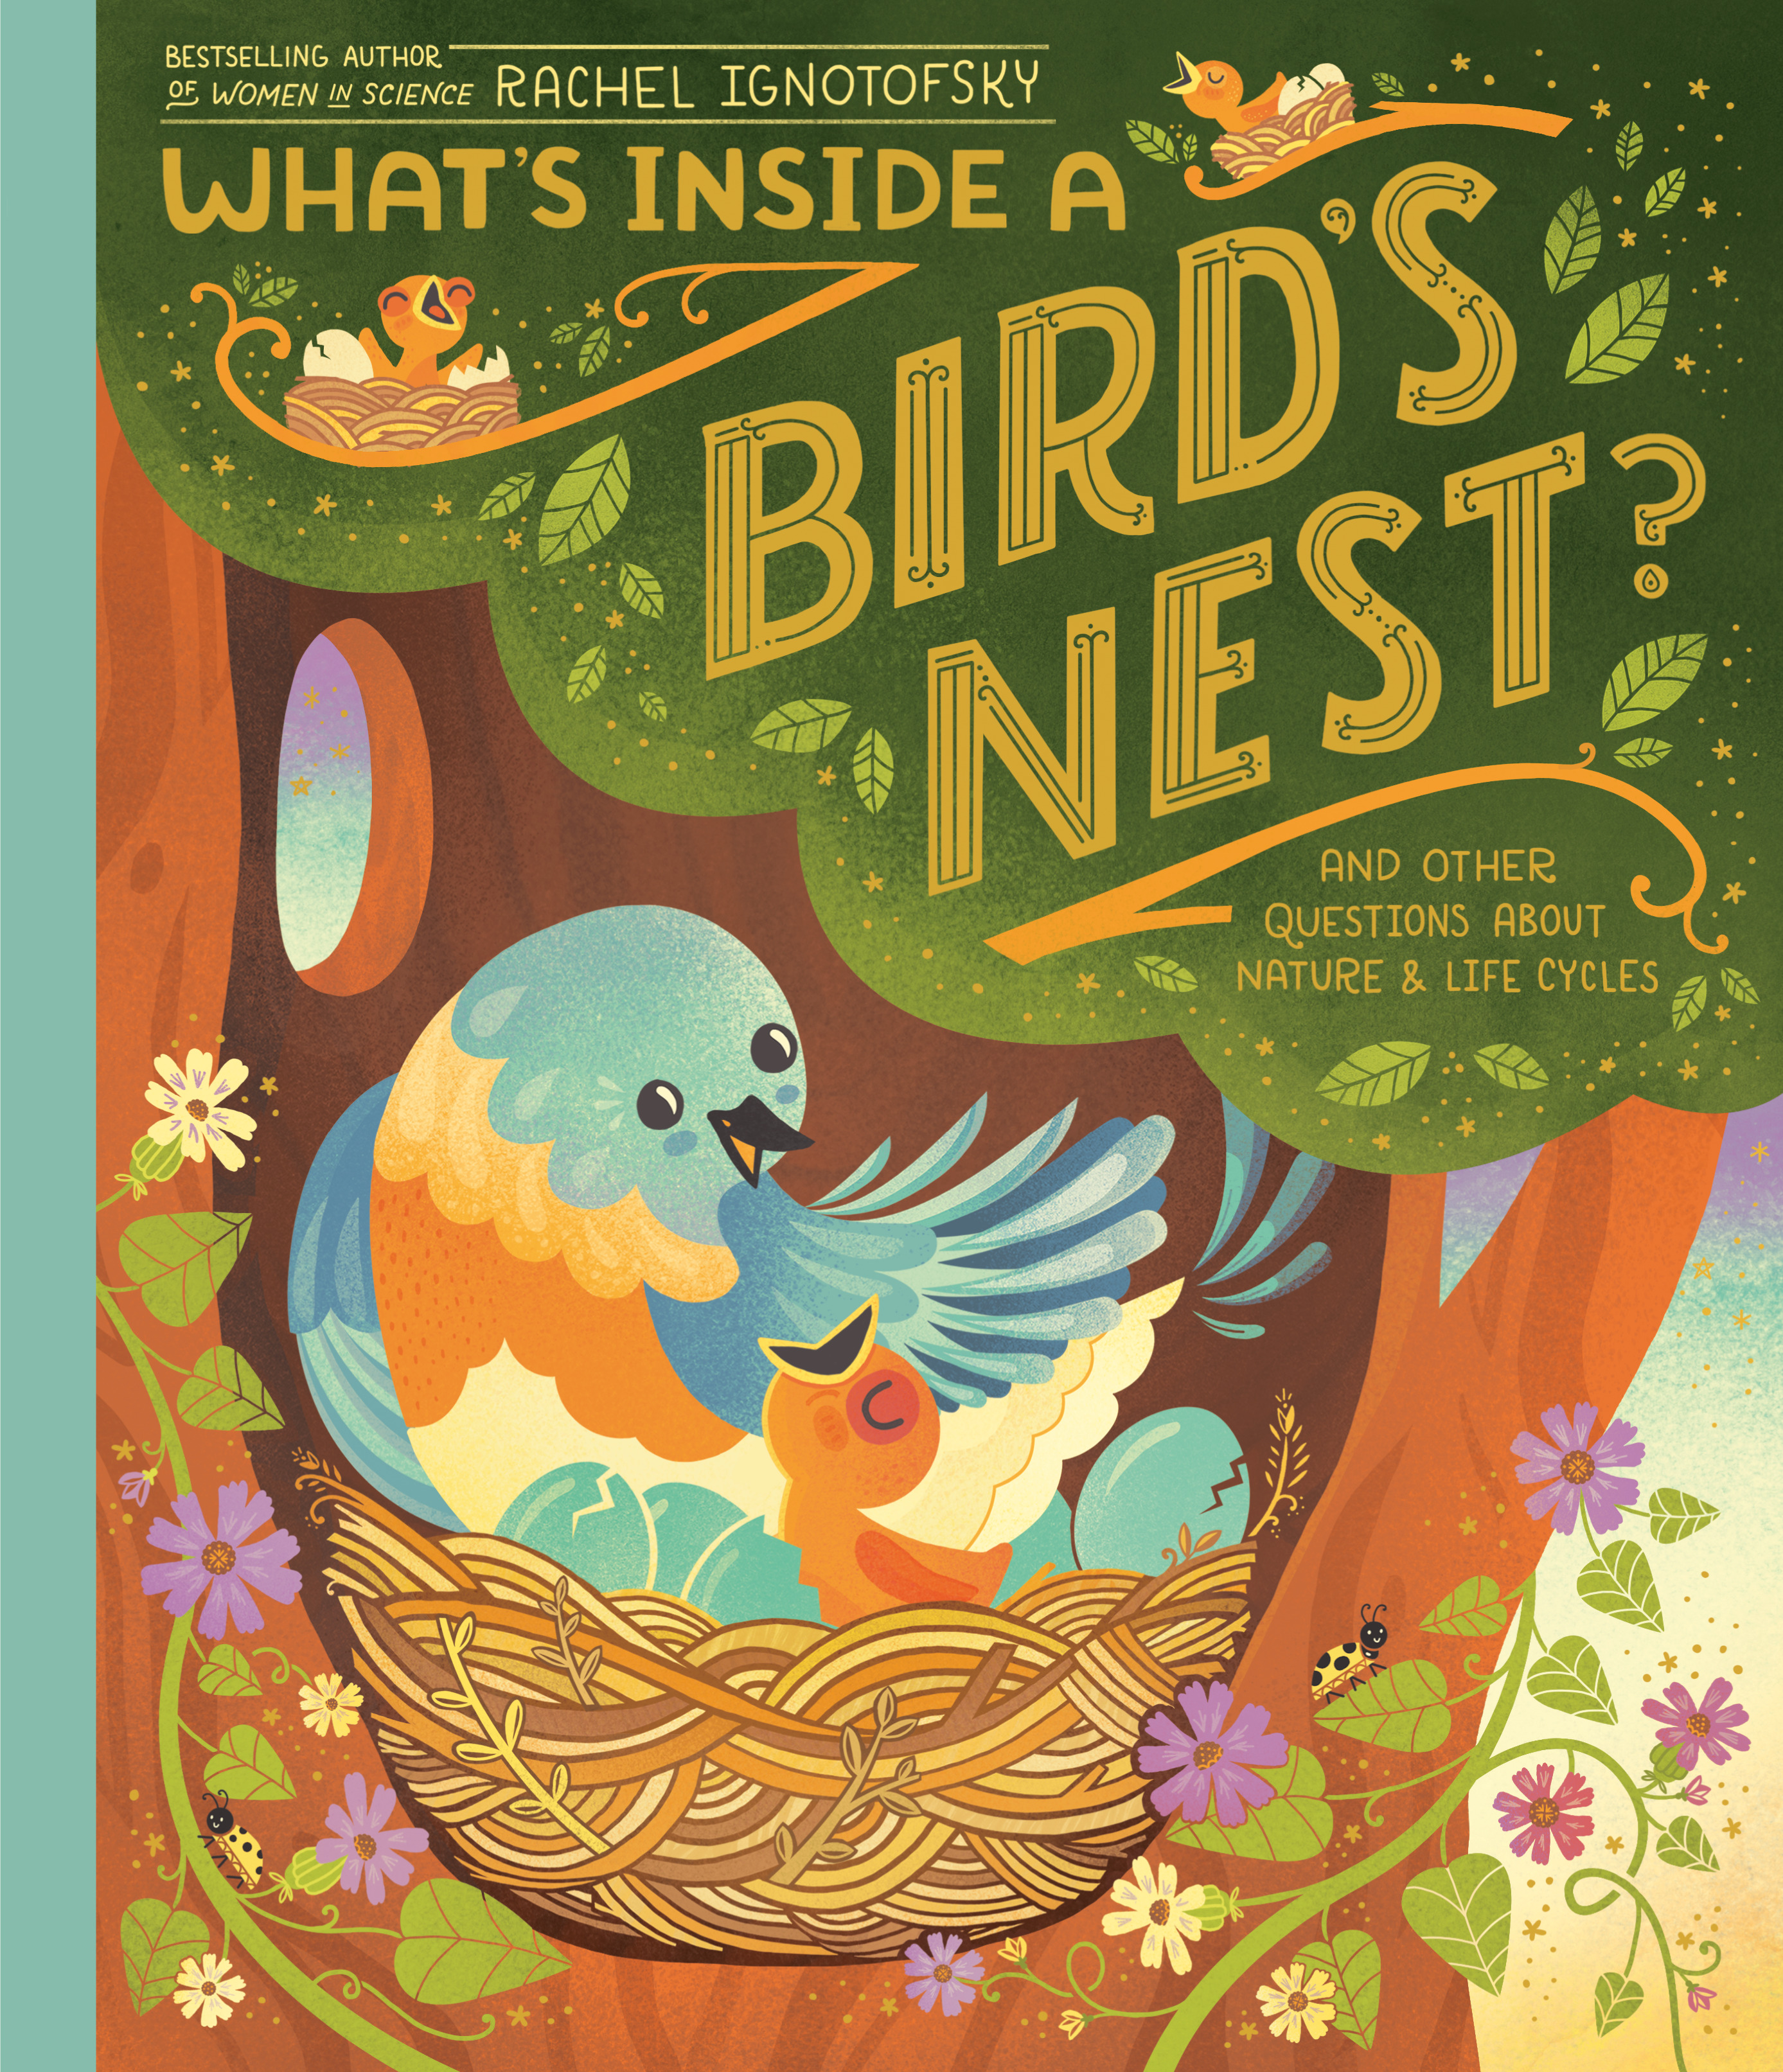 Cover of the book "What's Inside a Bird Nest?" by Rachel Ignotofsky